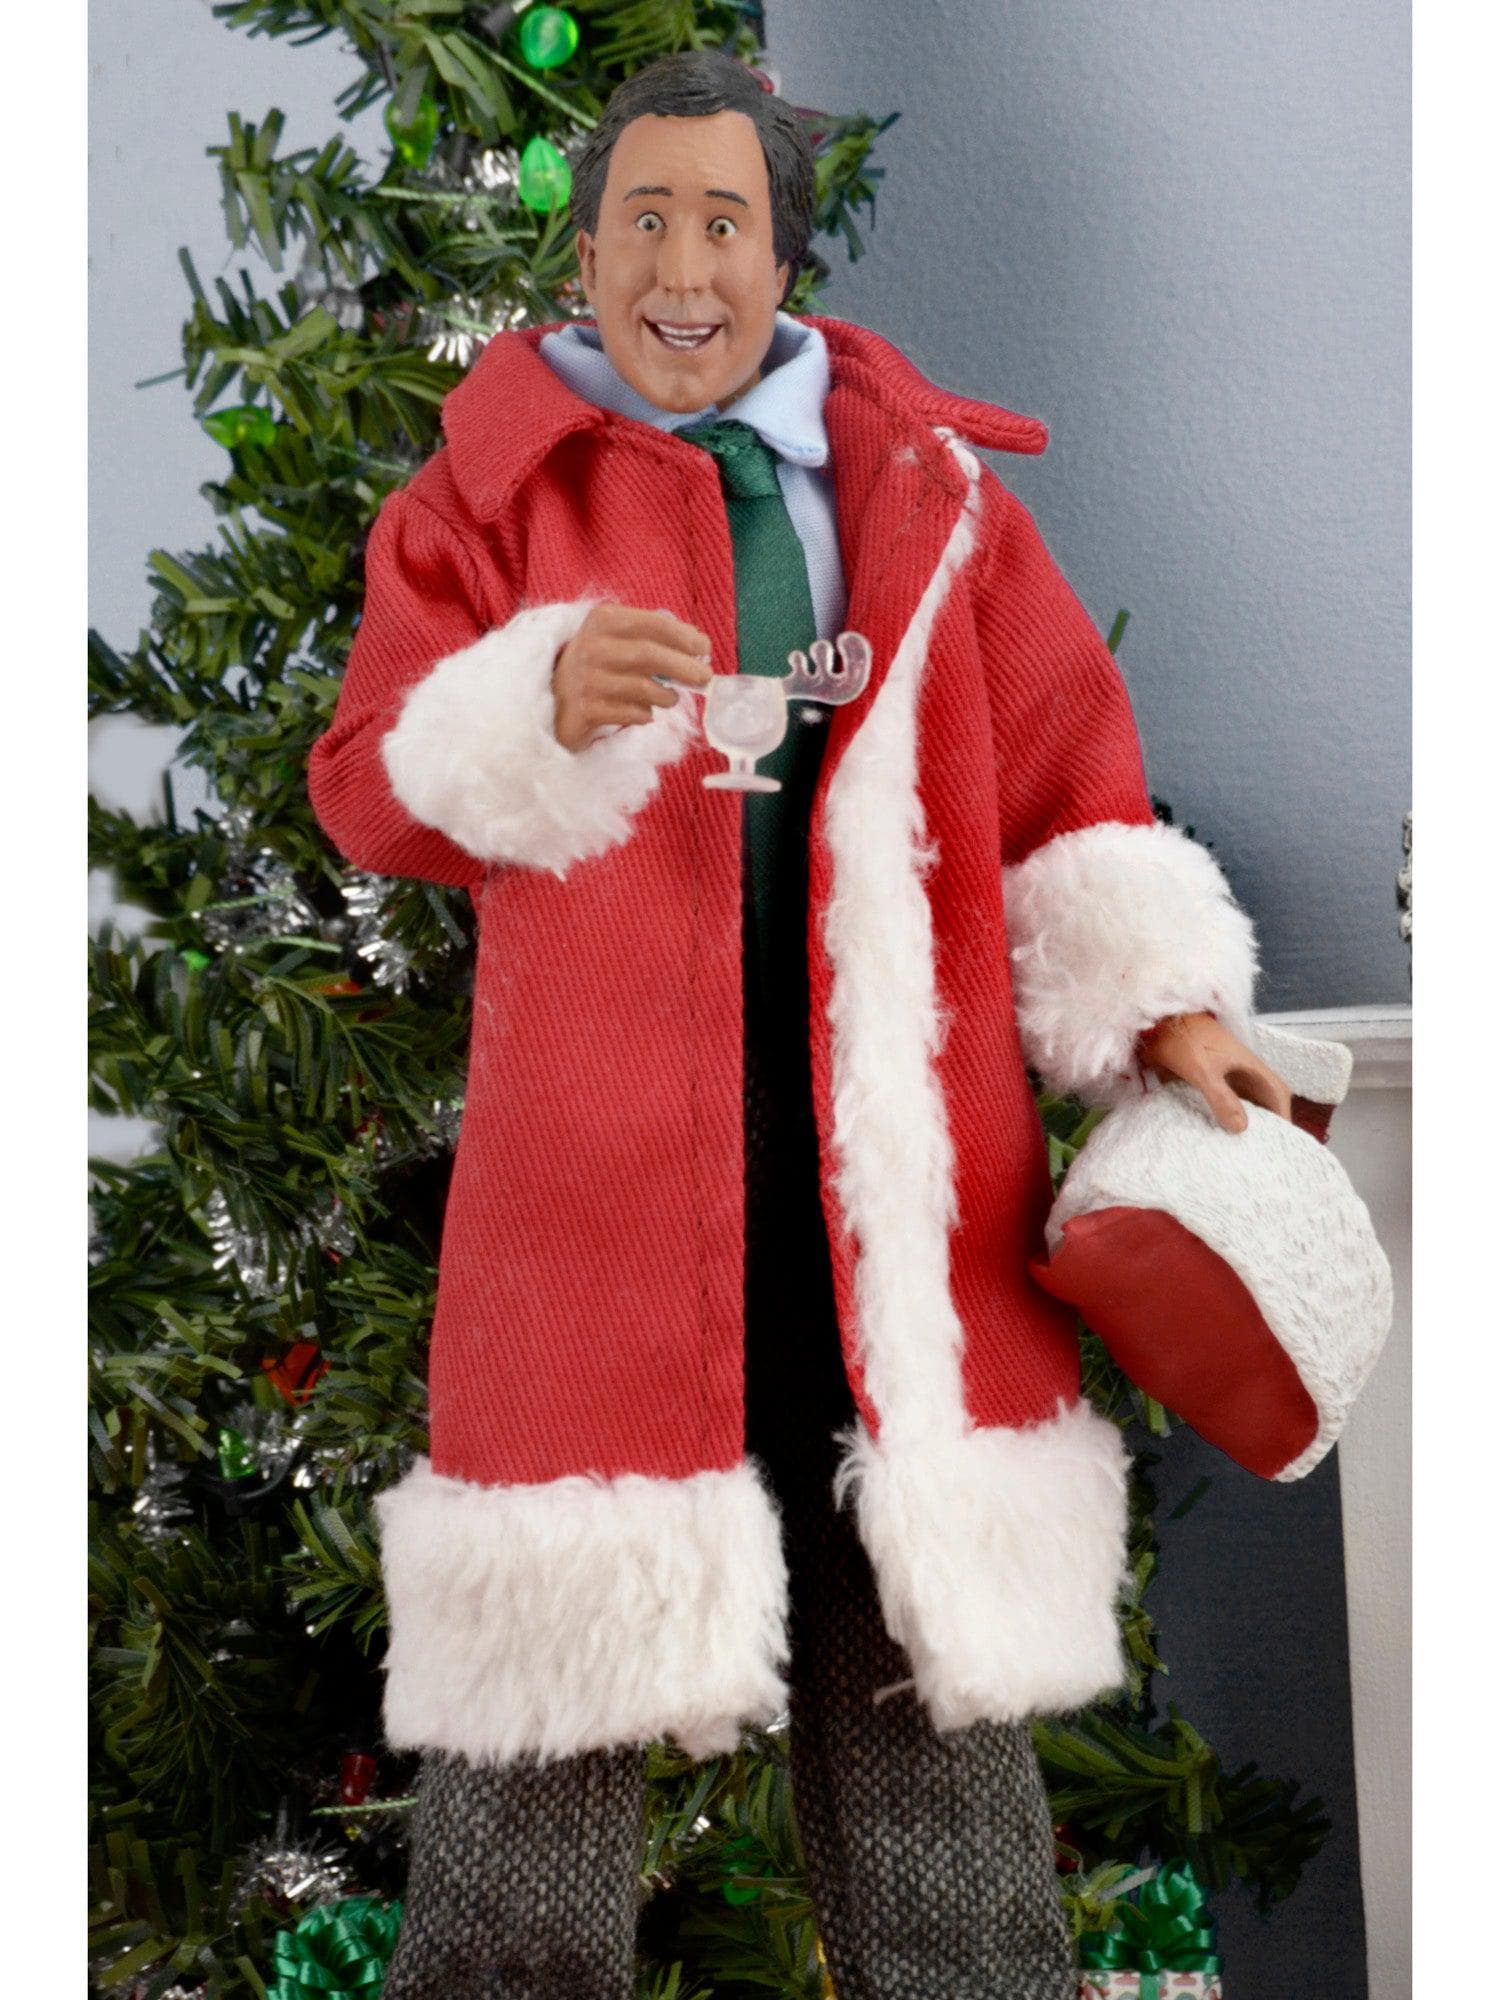 NECA - National Lampoon's Christmas Vacation - 8" Clothed Action Figure - Santa Clark - costumes.com